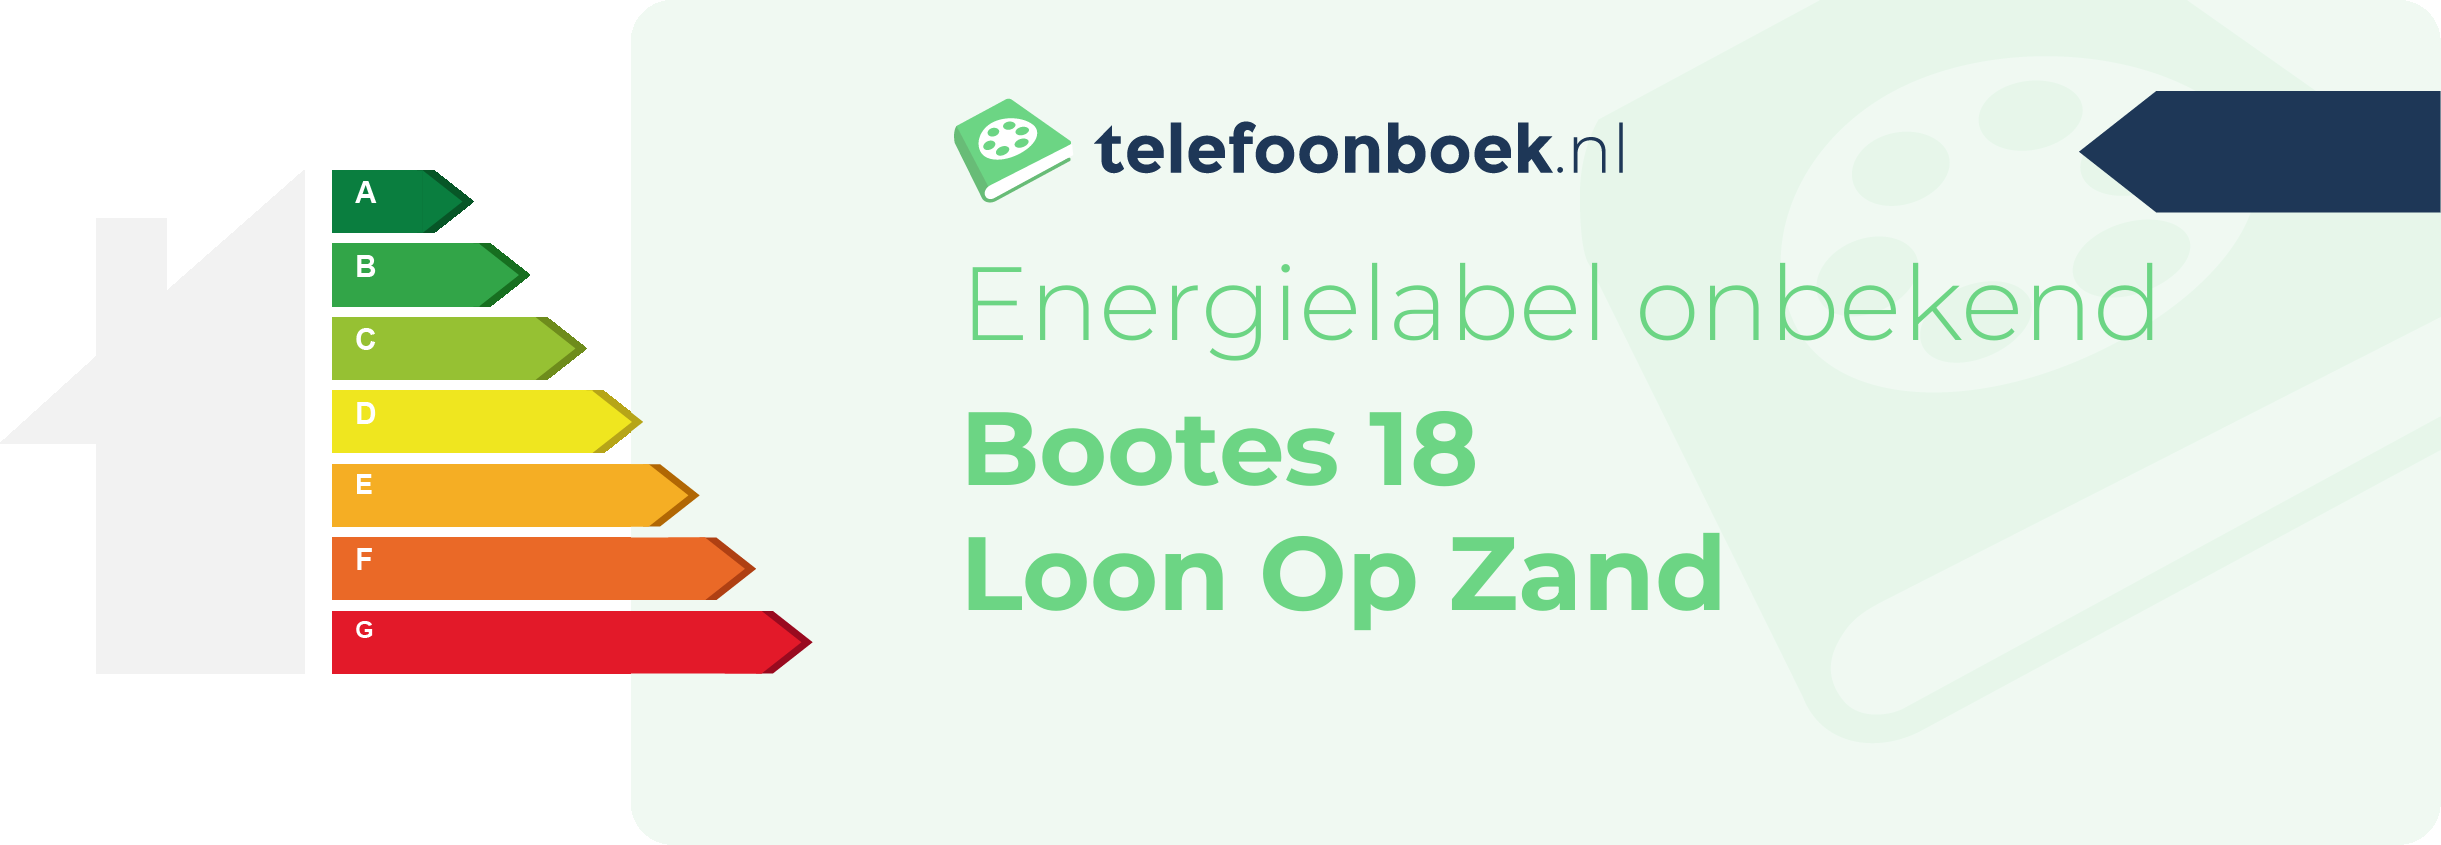 Energielabel Bootes 18 Loon Op Zand